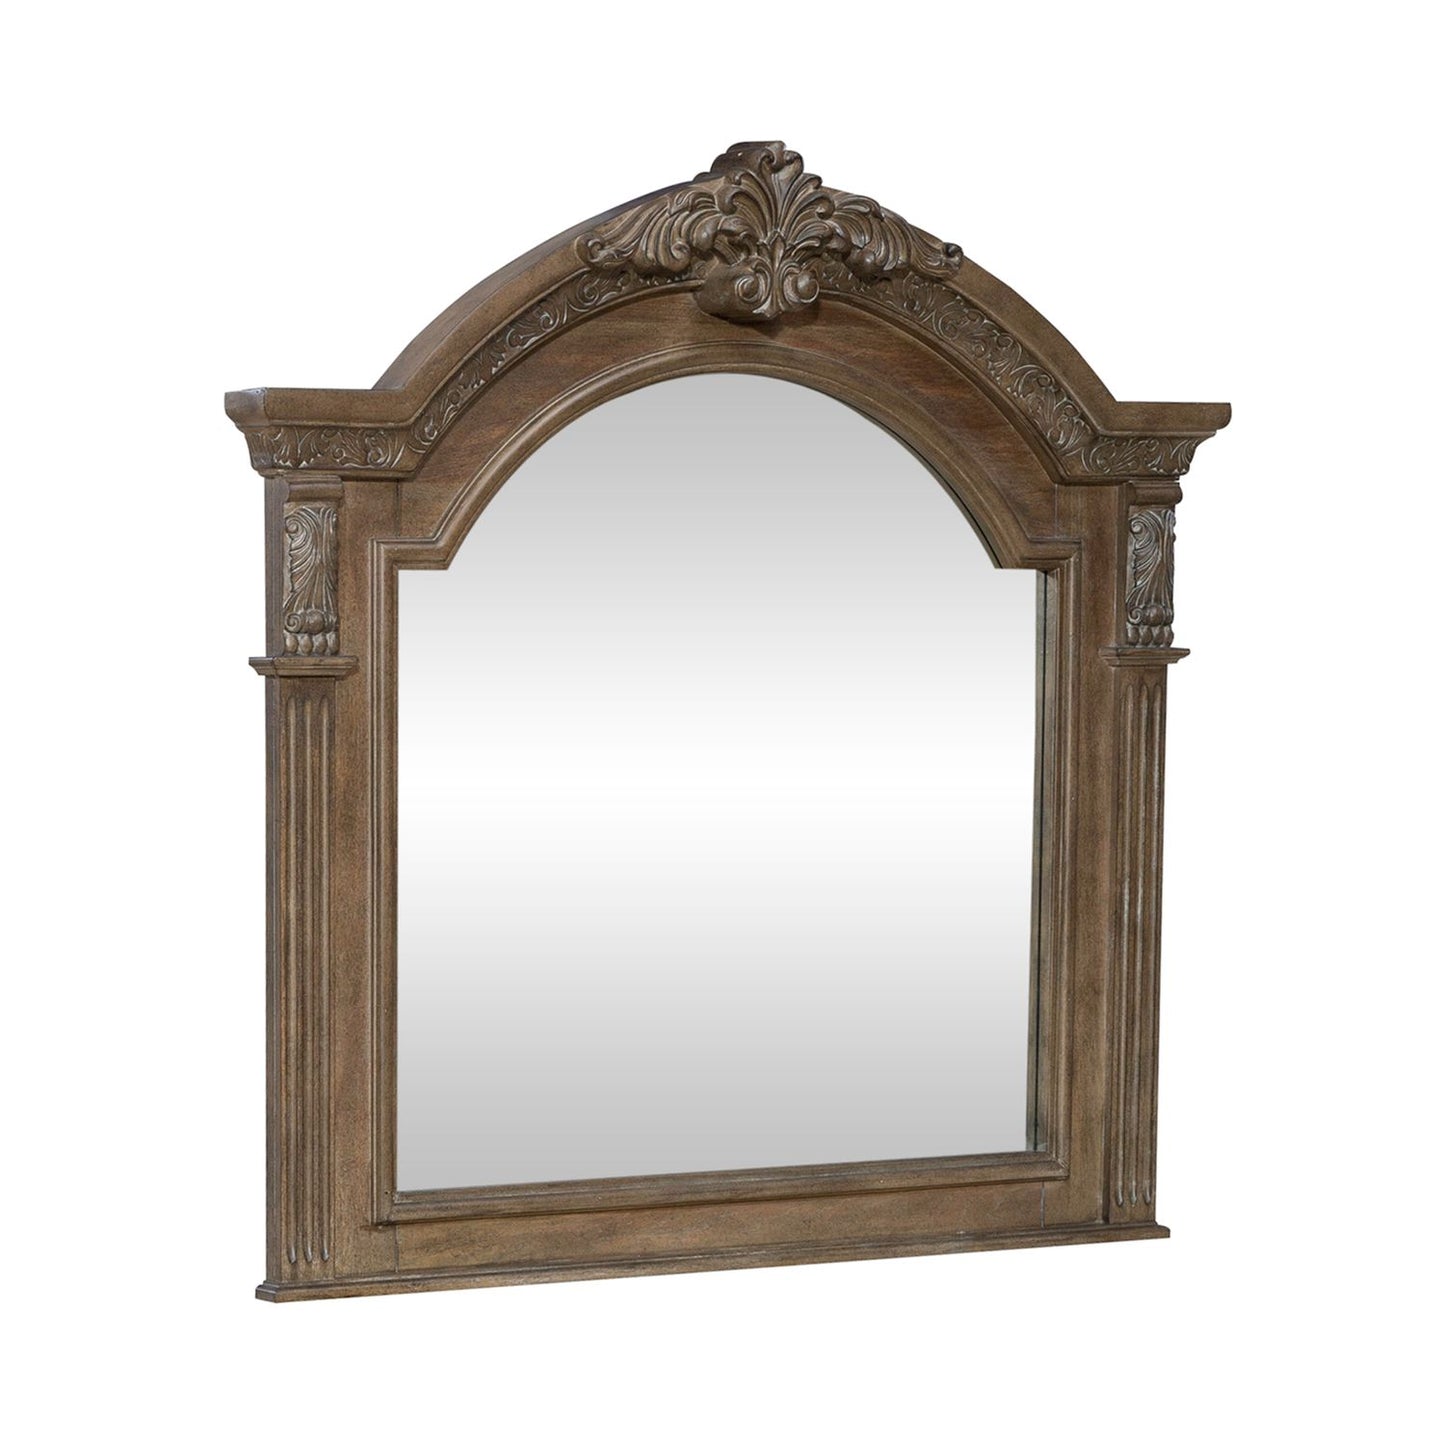 Carlisle Court - Arched Mirror